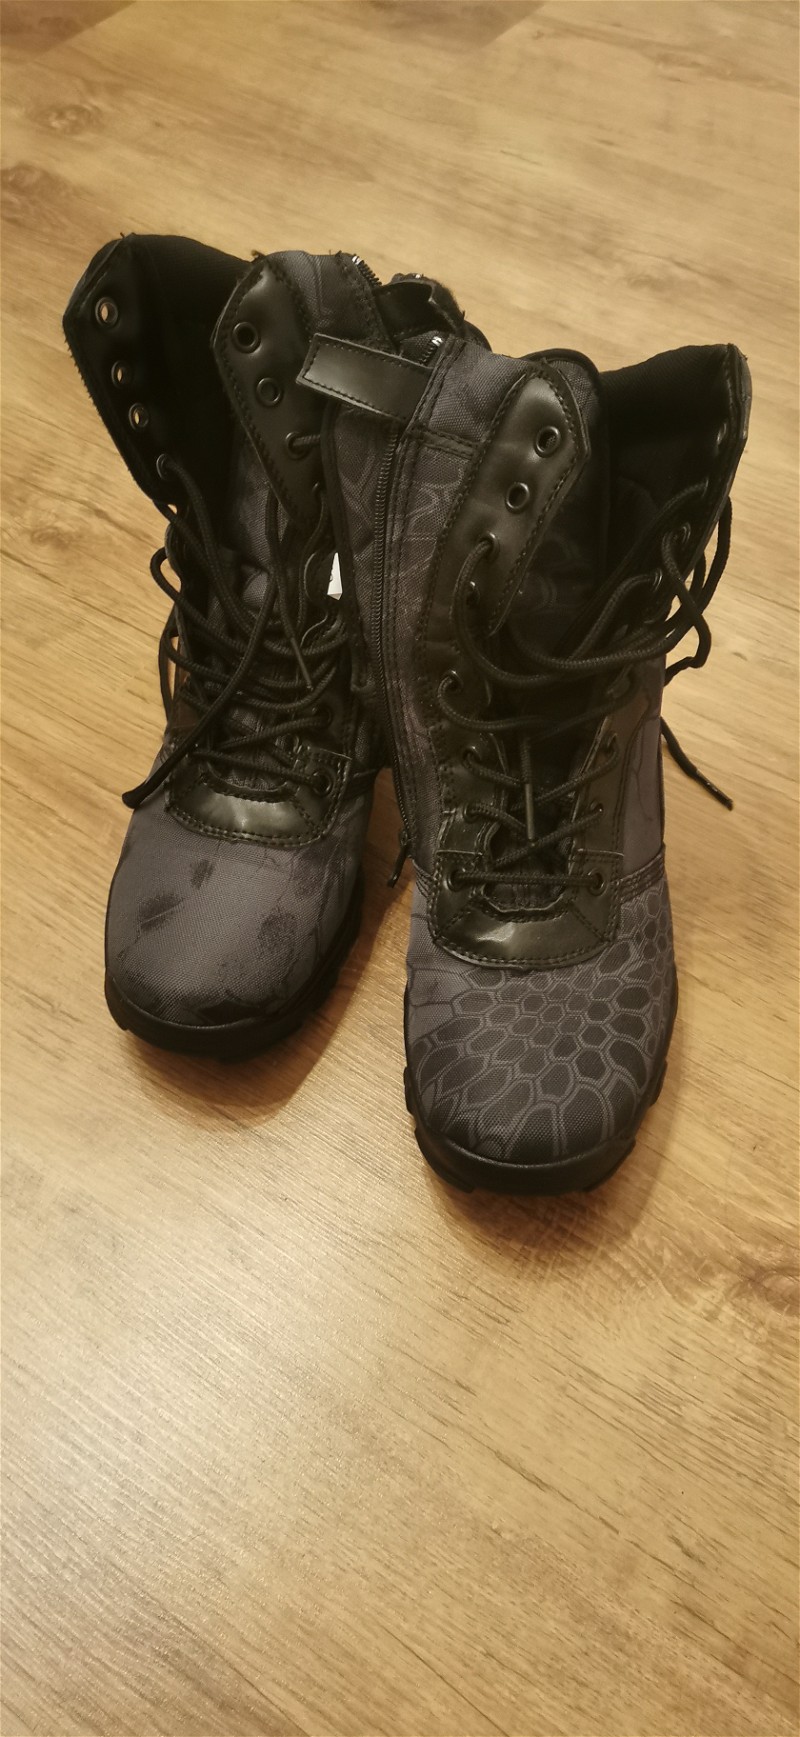 Image 1 for Tactical boots